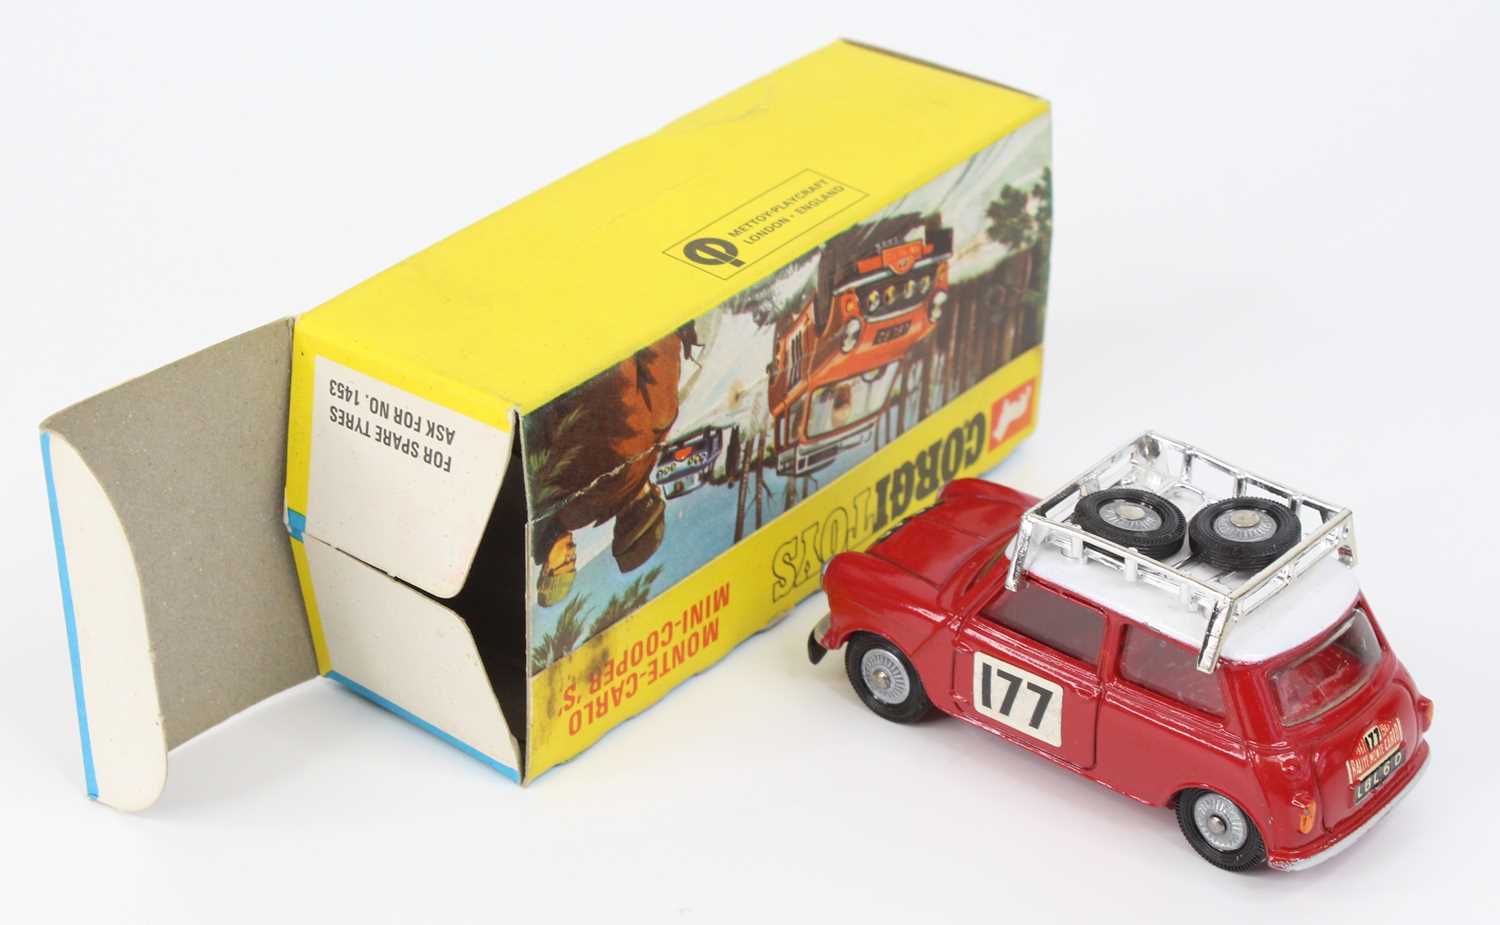 Corgi Toys, 339 Mini Cooper S Monte Carlo Winner, red body with white roof, racing number 177, 2 - Image 4 of 4